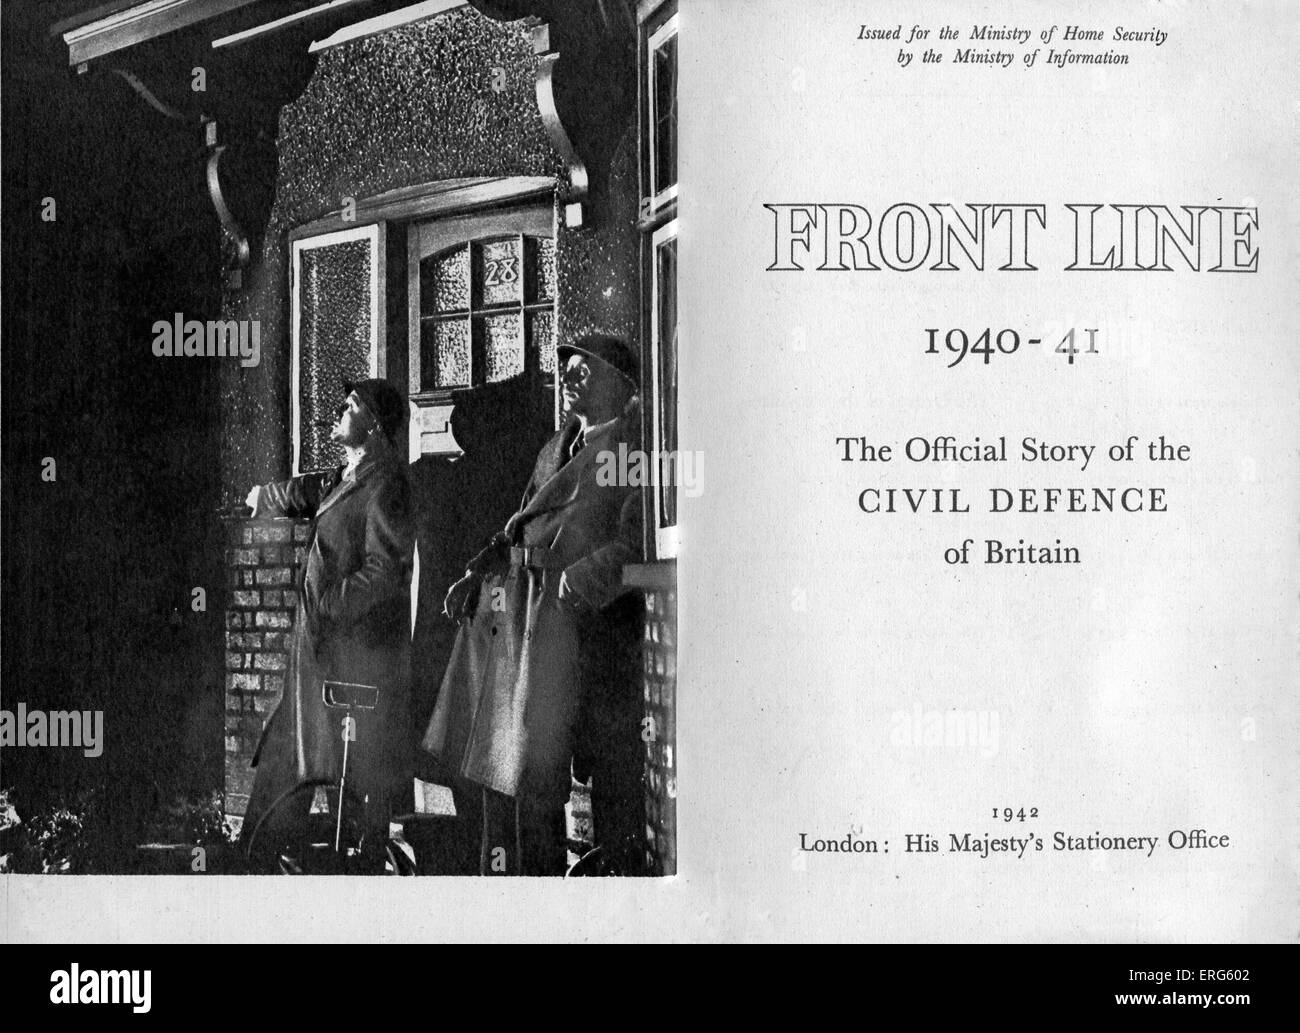 World War 2 information book - title page. Entitled: Front Line 1940- 41, The Official Story of the Civil Defence of Britain. Stock Photo